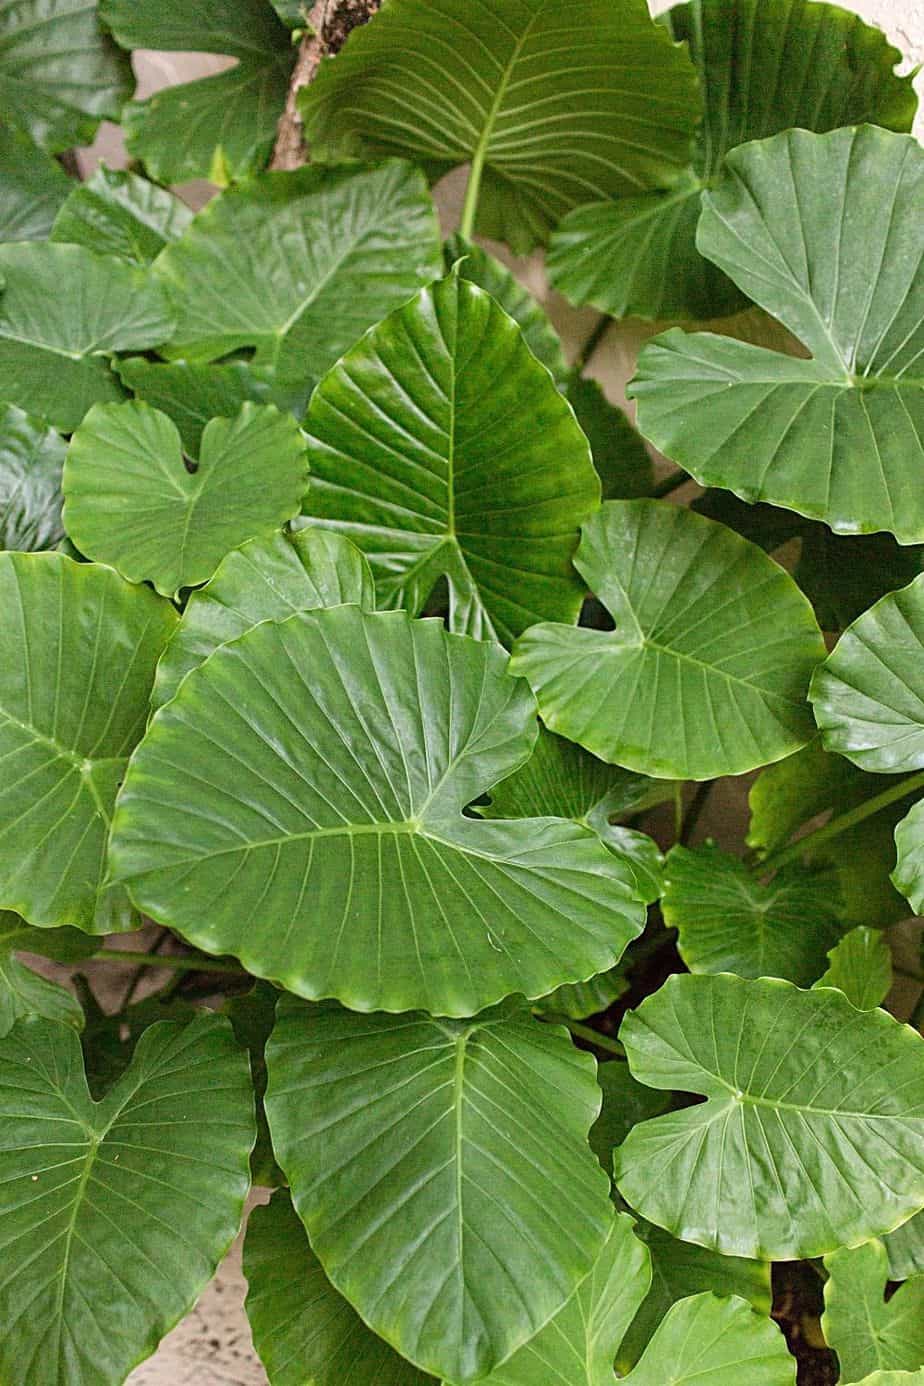 Elephant Ear can be a great plant to grow for privacy of your garden or porch